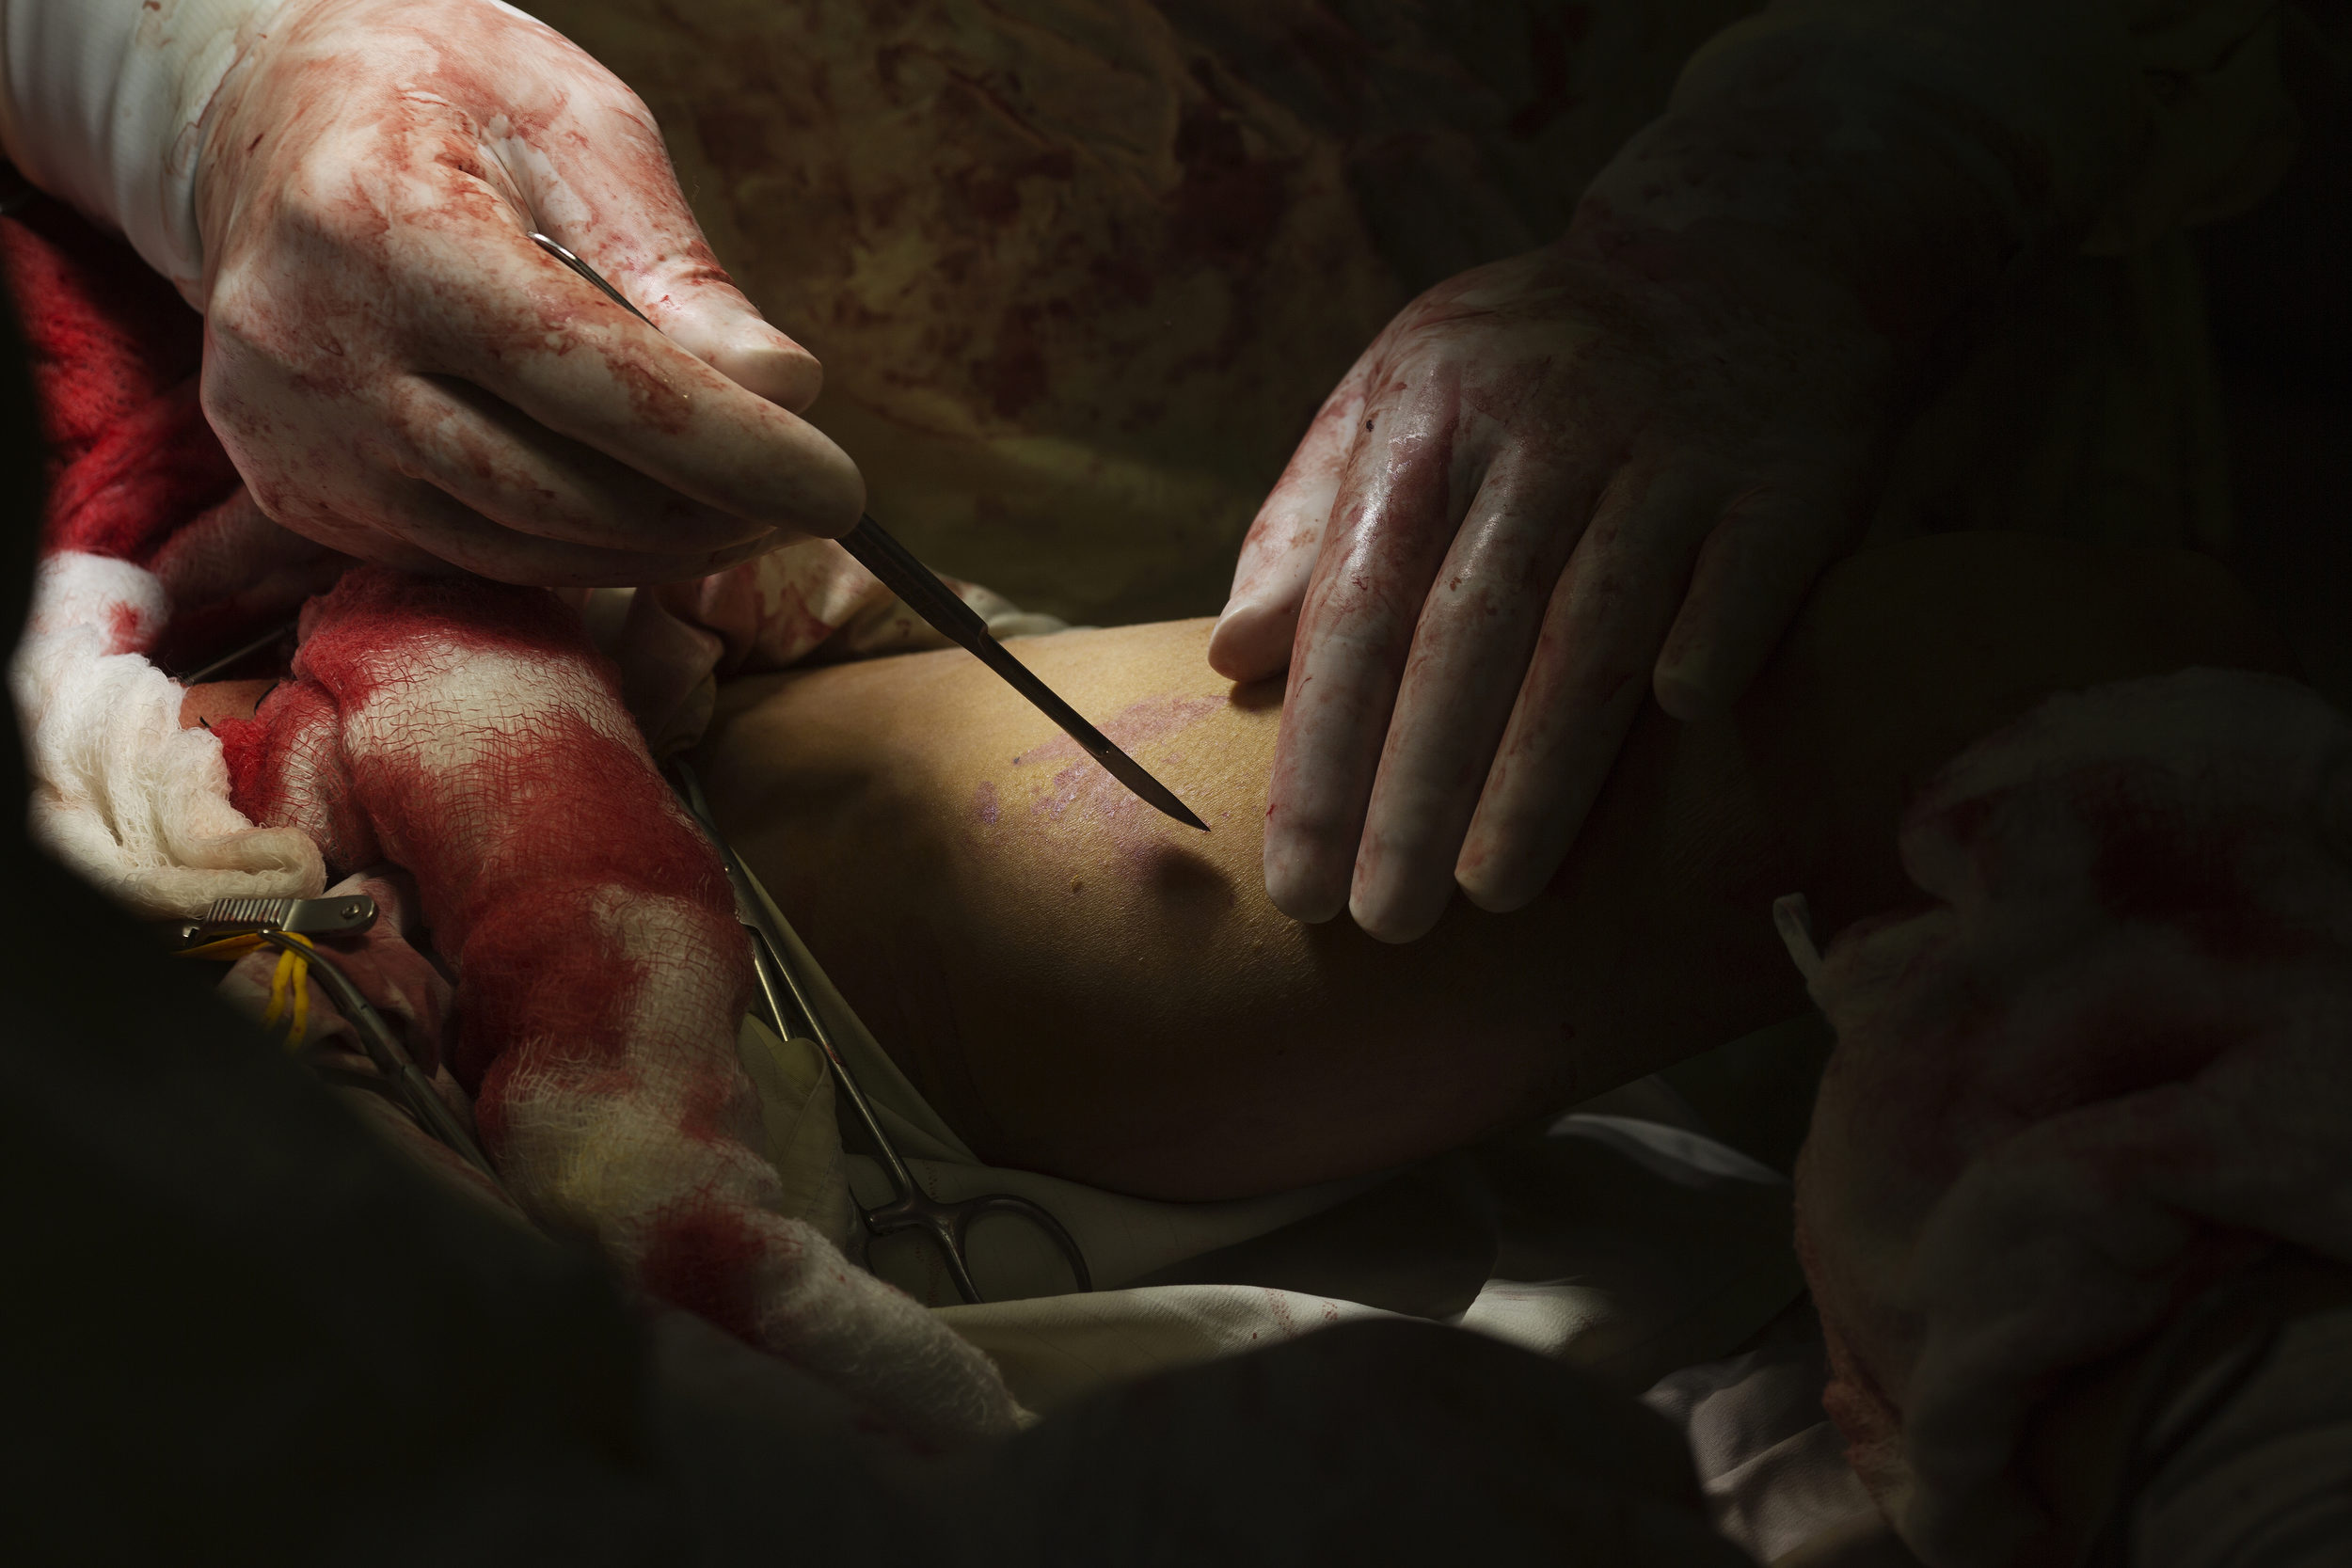  Dr. Shukur Sardar prepares to open the thigh of Jan Mohammed, 10, to extract a vein for a vascular graft, after he suffered multiple blast injuries from an unexploded munition. 